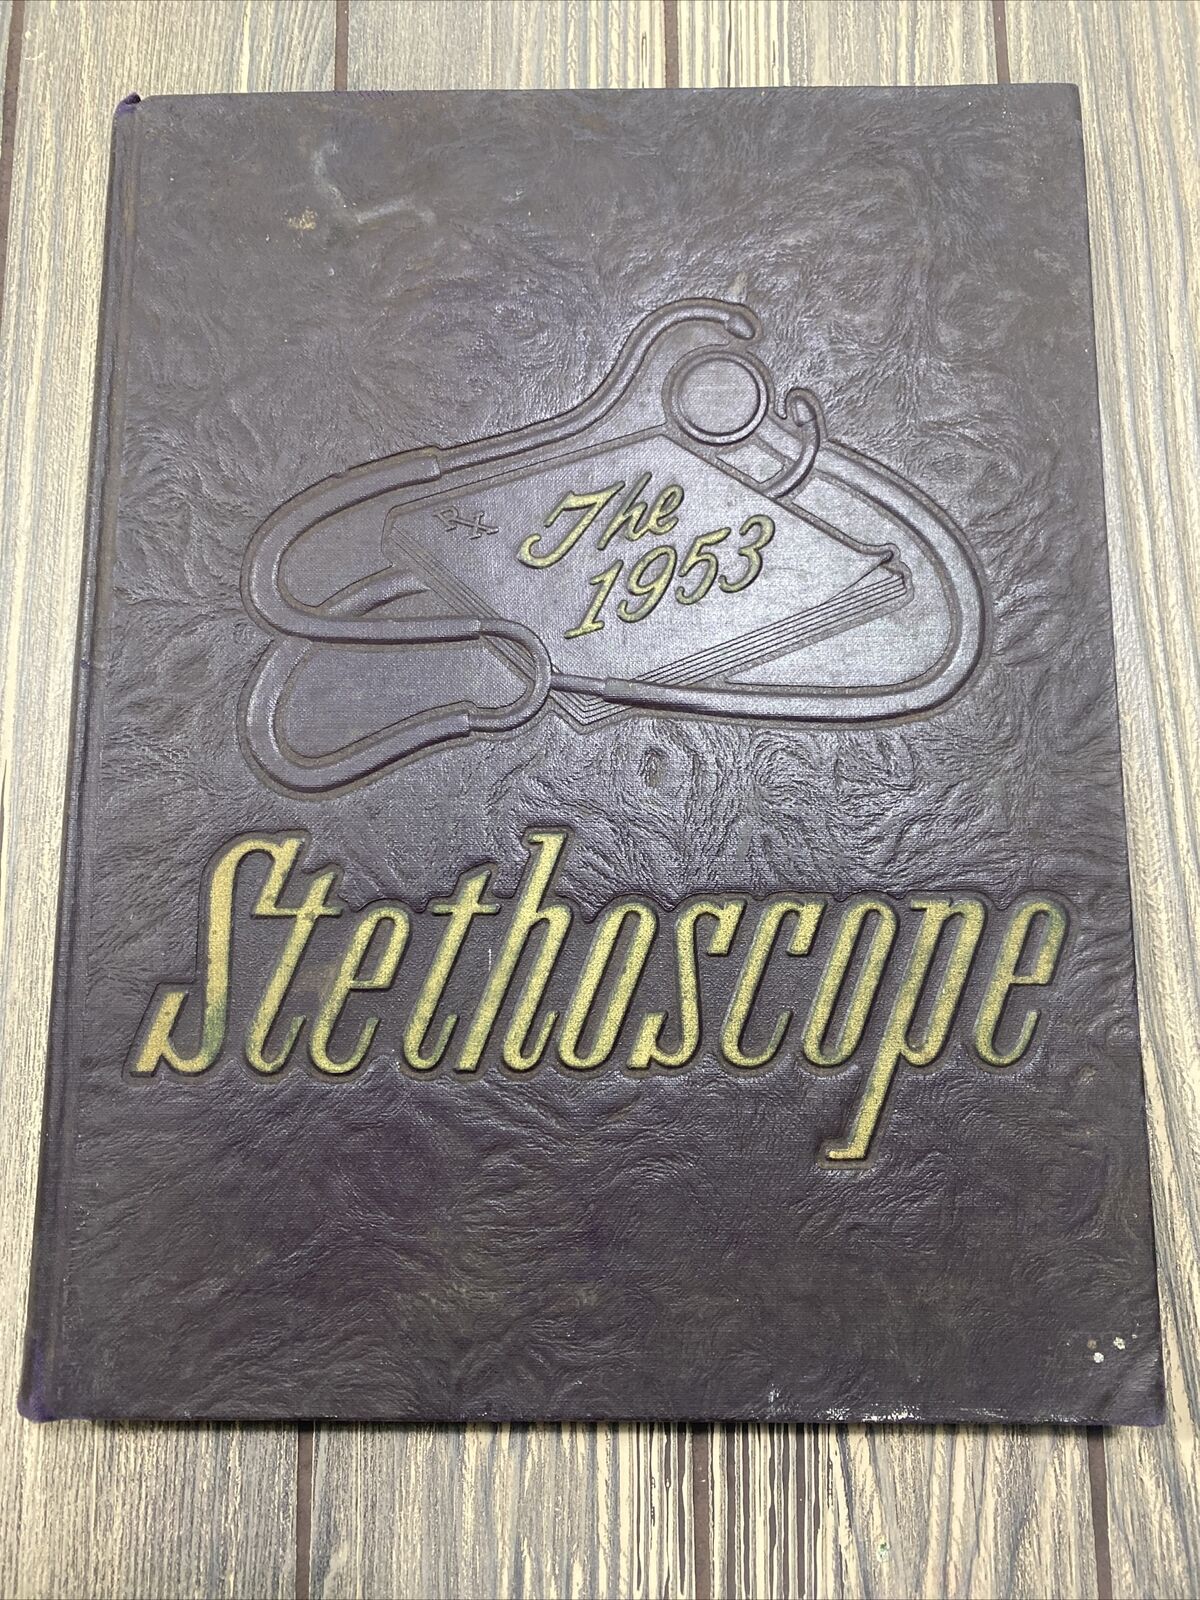 Vintage Kansas City College Of Osteopathy And Surgery Stethescope 1953 Yearbook